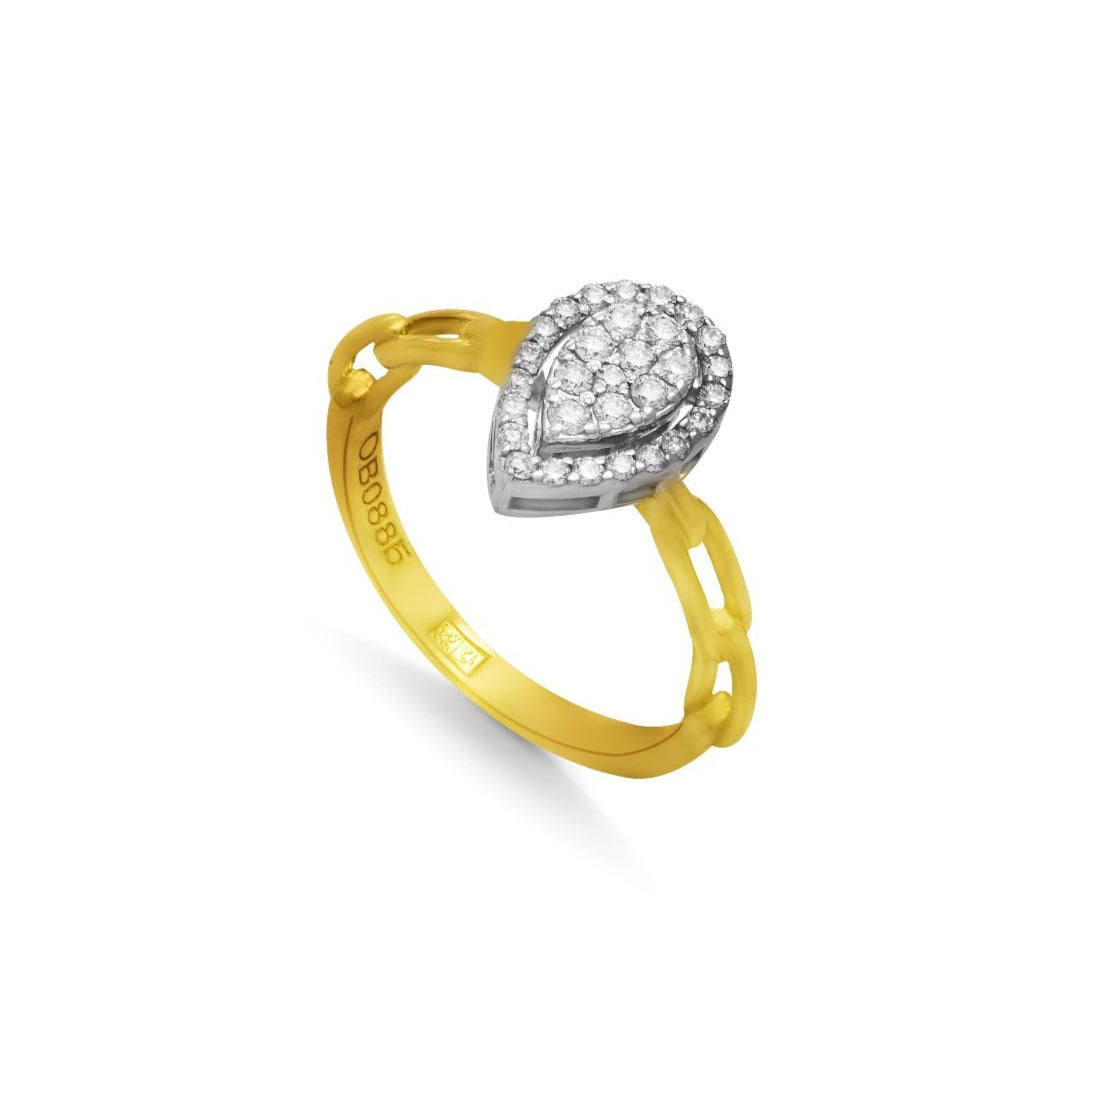 Pear Shapped Diamond Ring in Yellow 18K Gold - S-X10R